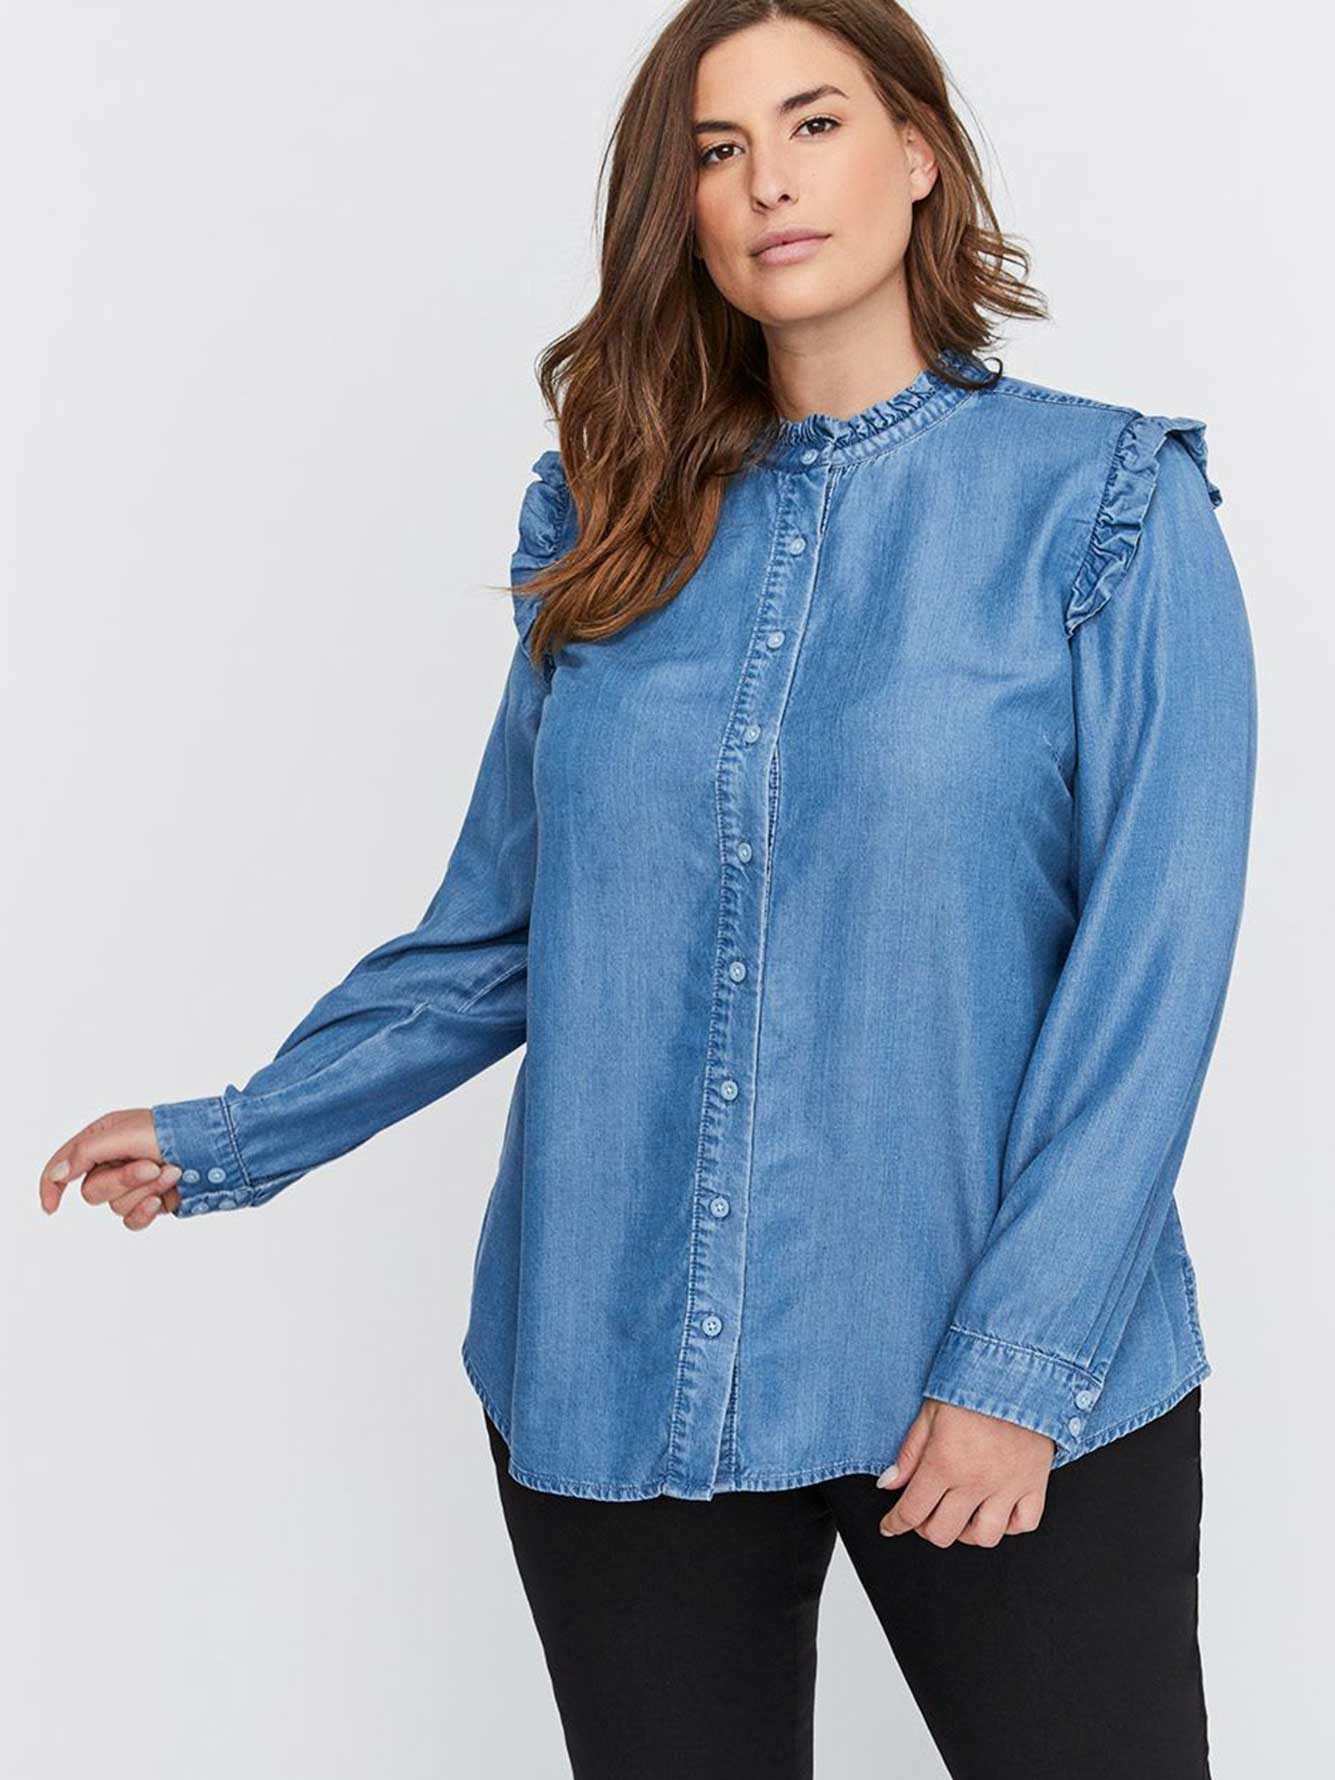 Long Sleeve Tencel Blouse with Ruffle Details - L&L | Addition Elle